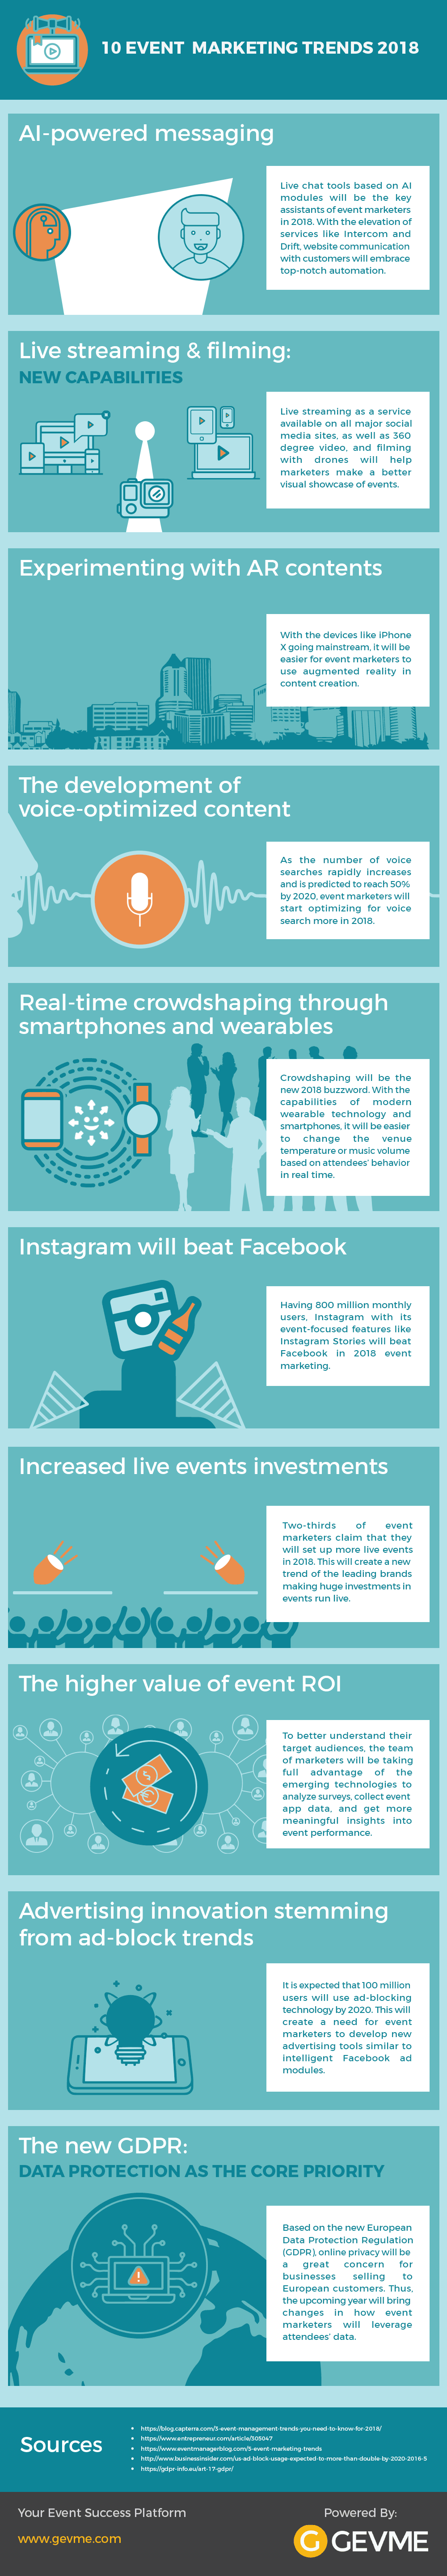 Event Marketing Trends in 2018